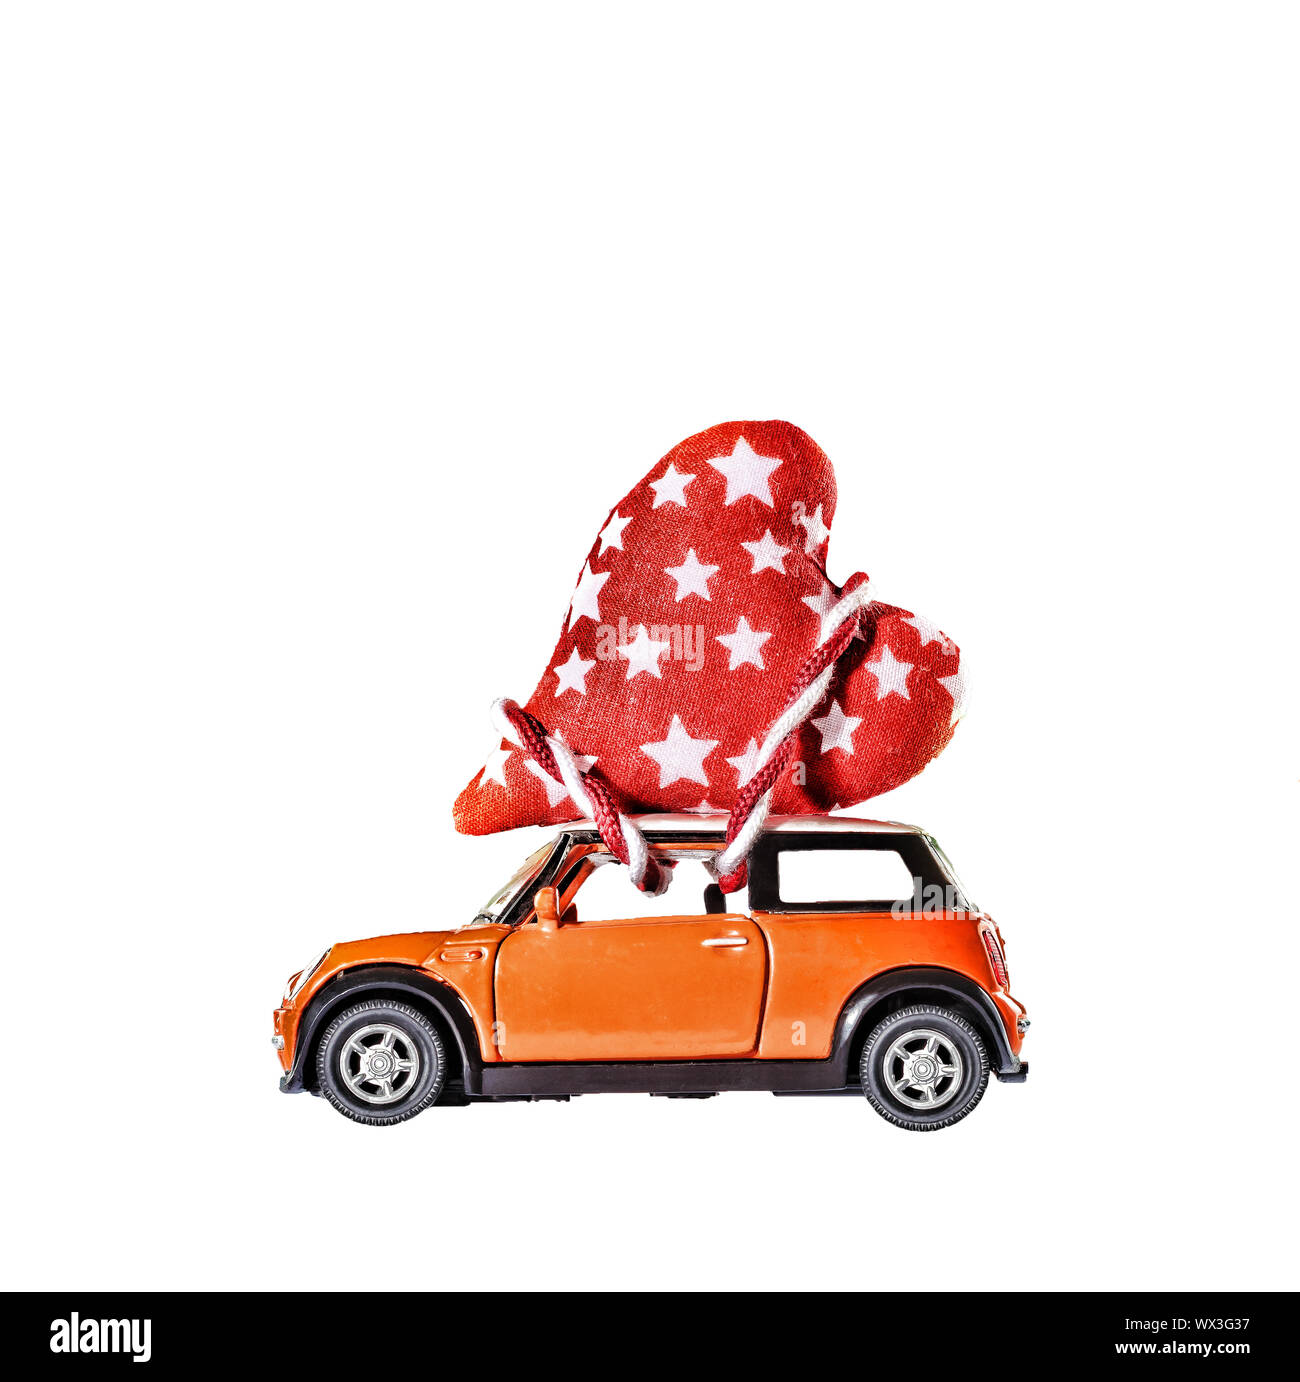 Toy car, heart, Valentine's Day, isolated, copy space Stock Photo